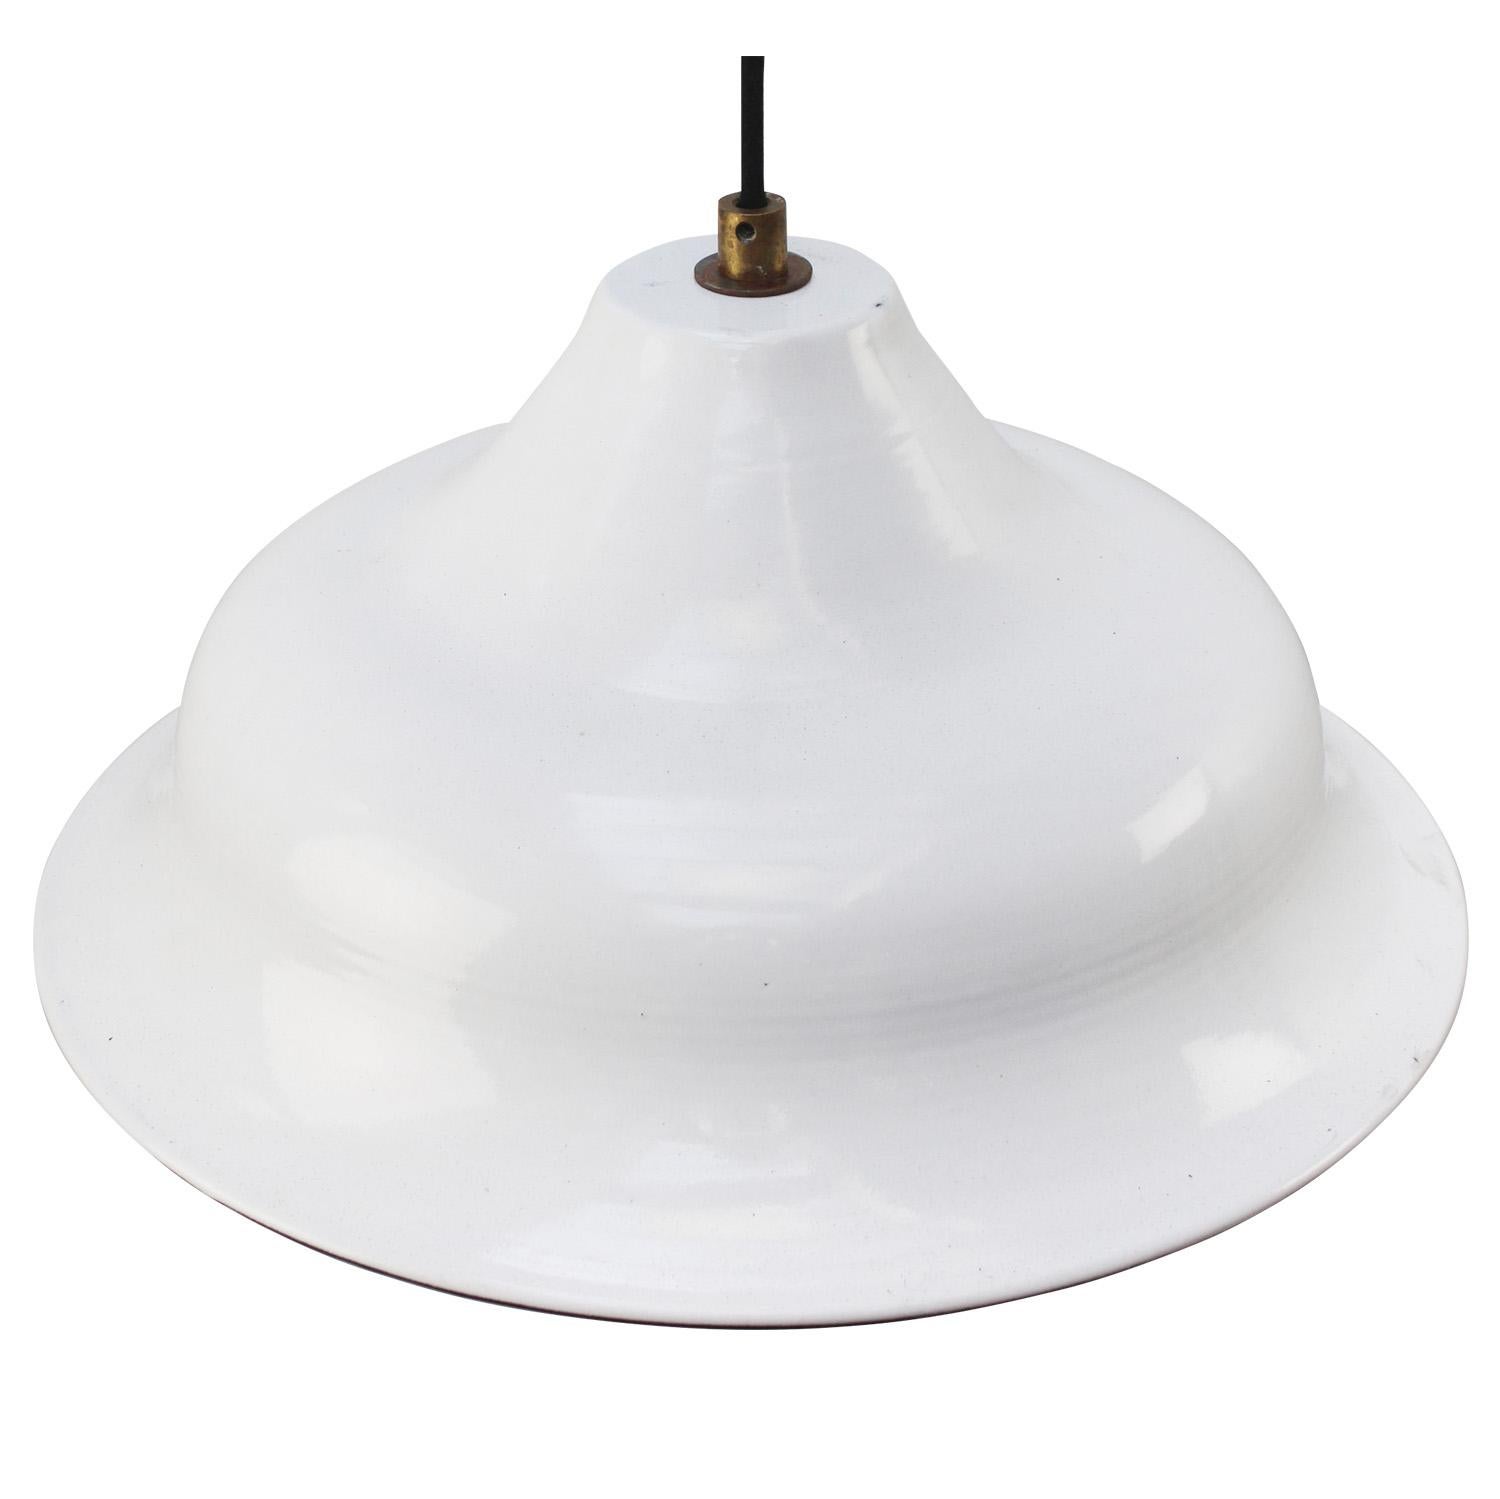 Industrial factory pendant made of white enamel. 
White interior with Brass top.

Weight: 2.30 kg / 5.1 lb

Priced per individual item. All lamps have been made suitable by international standards for incandescent light bulbs, energy-efficient and